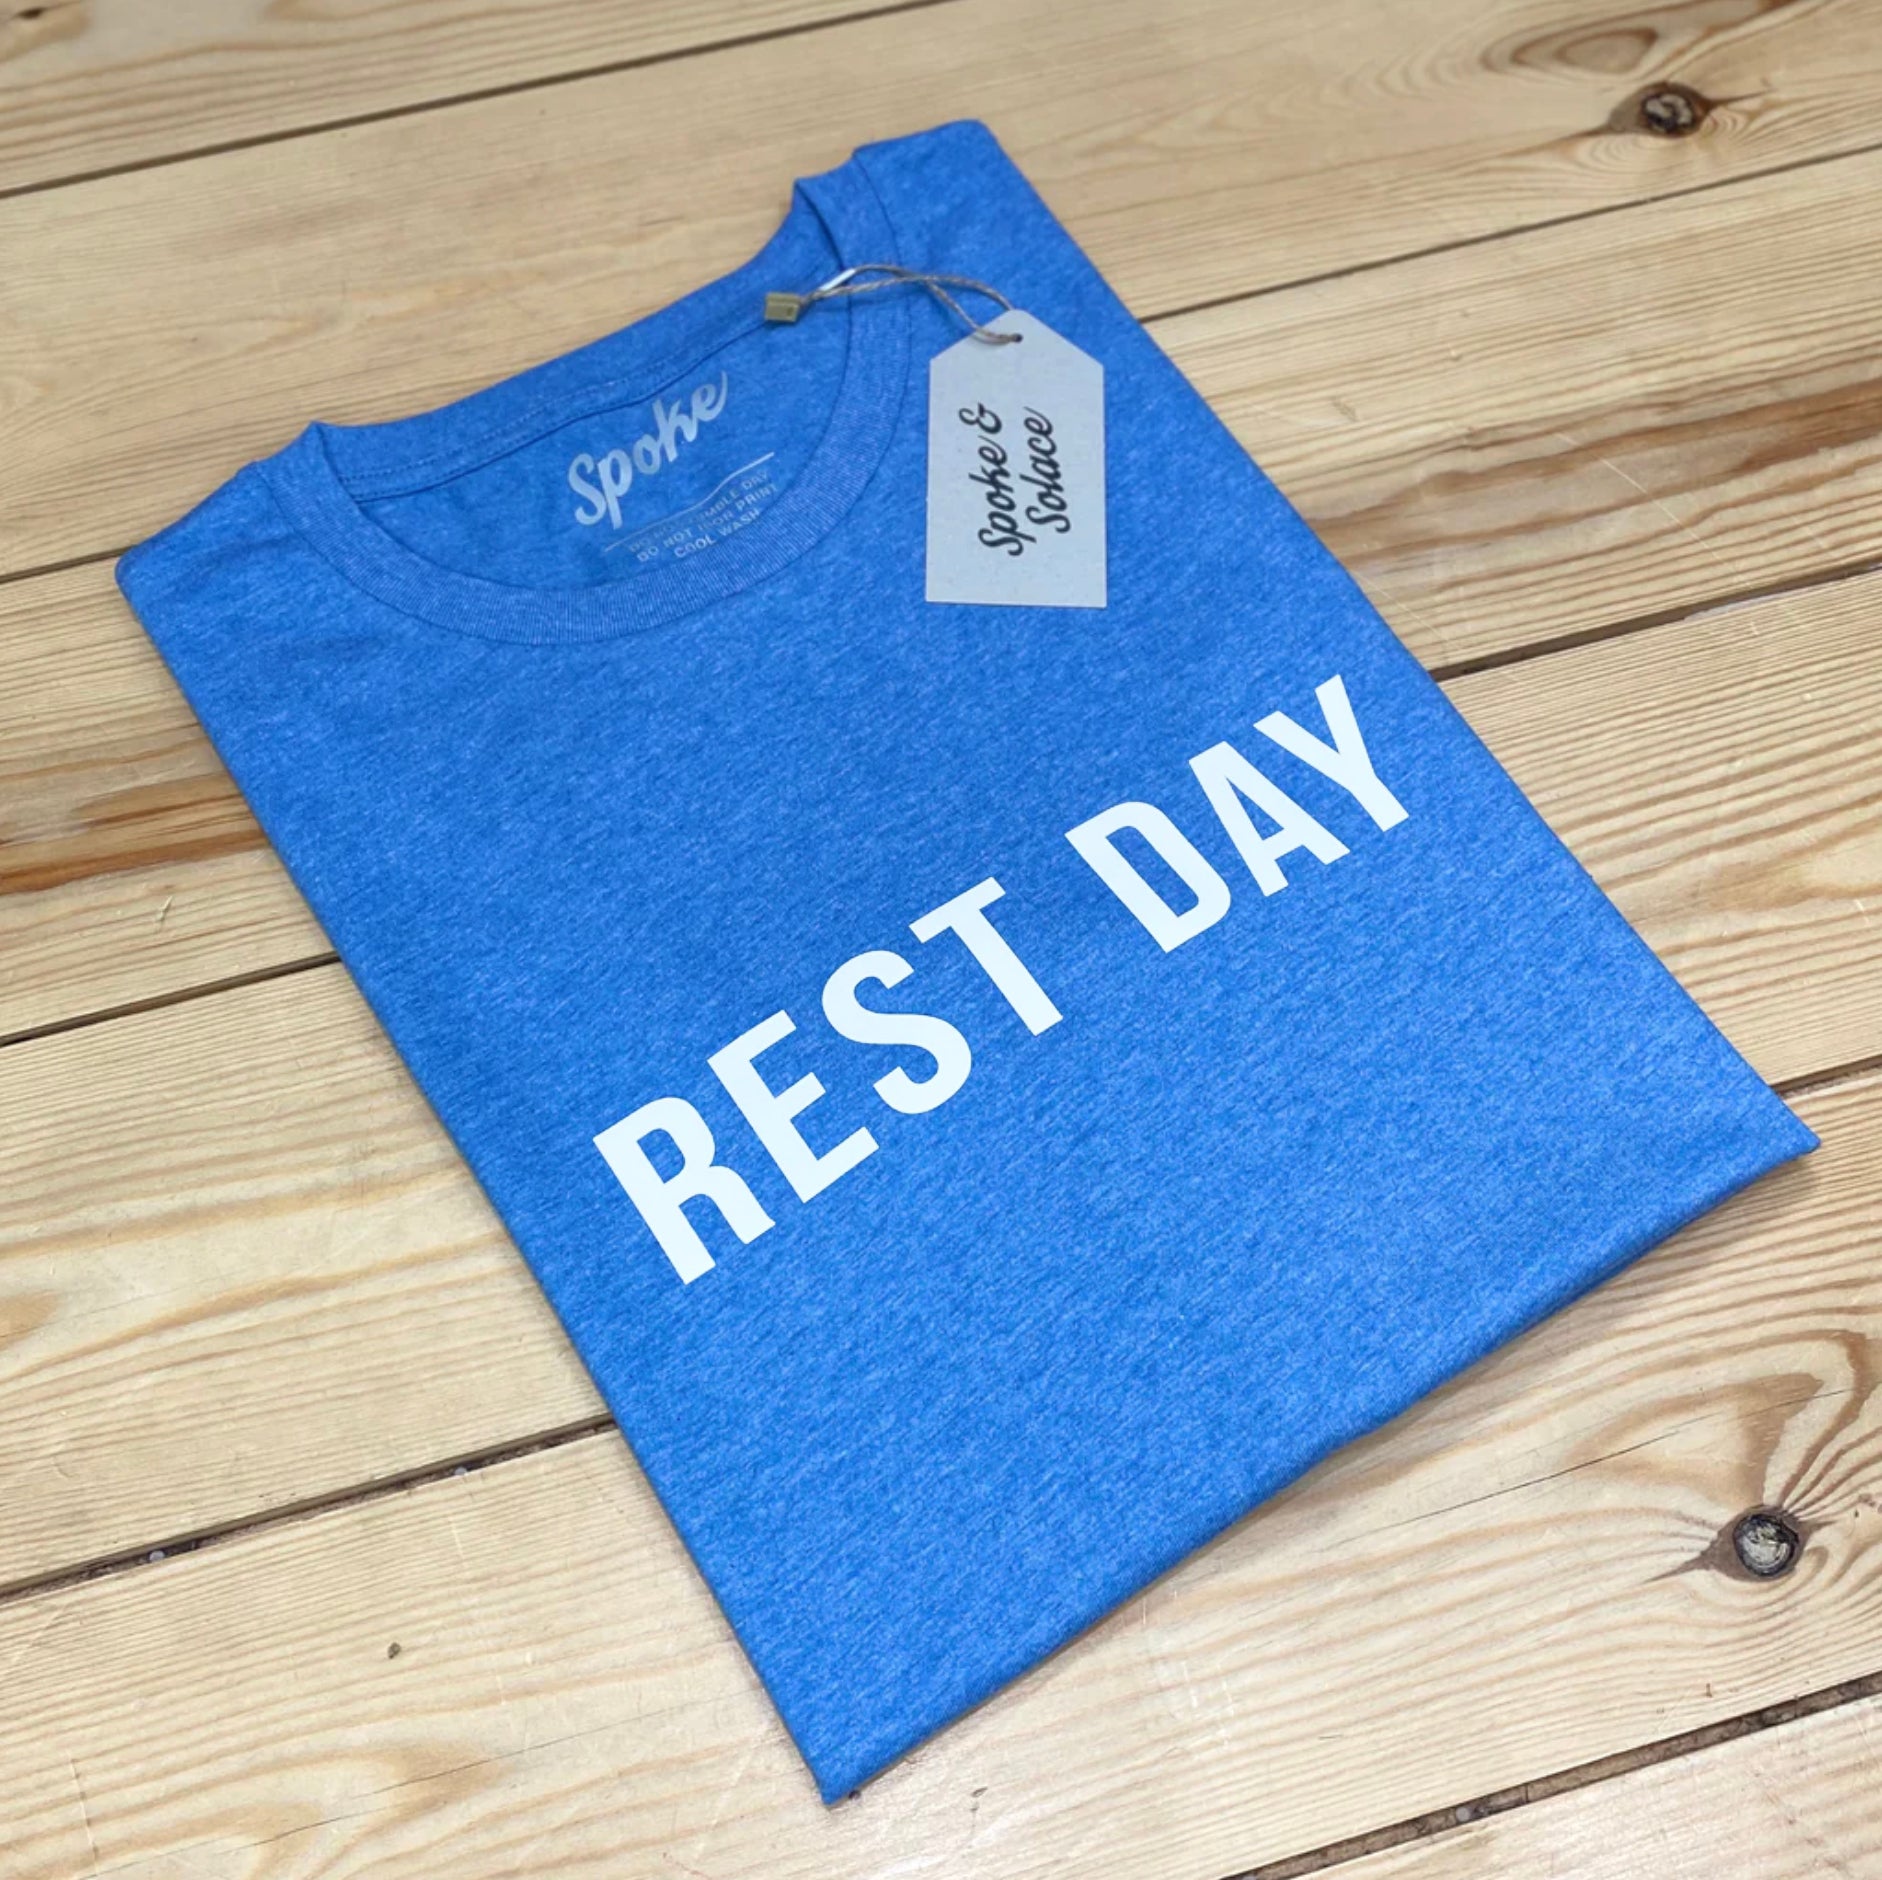 Rest Day T-Shirt